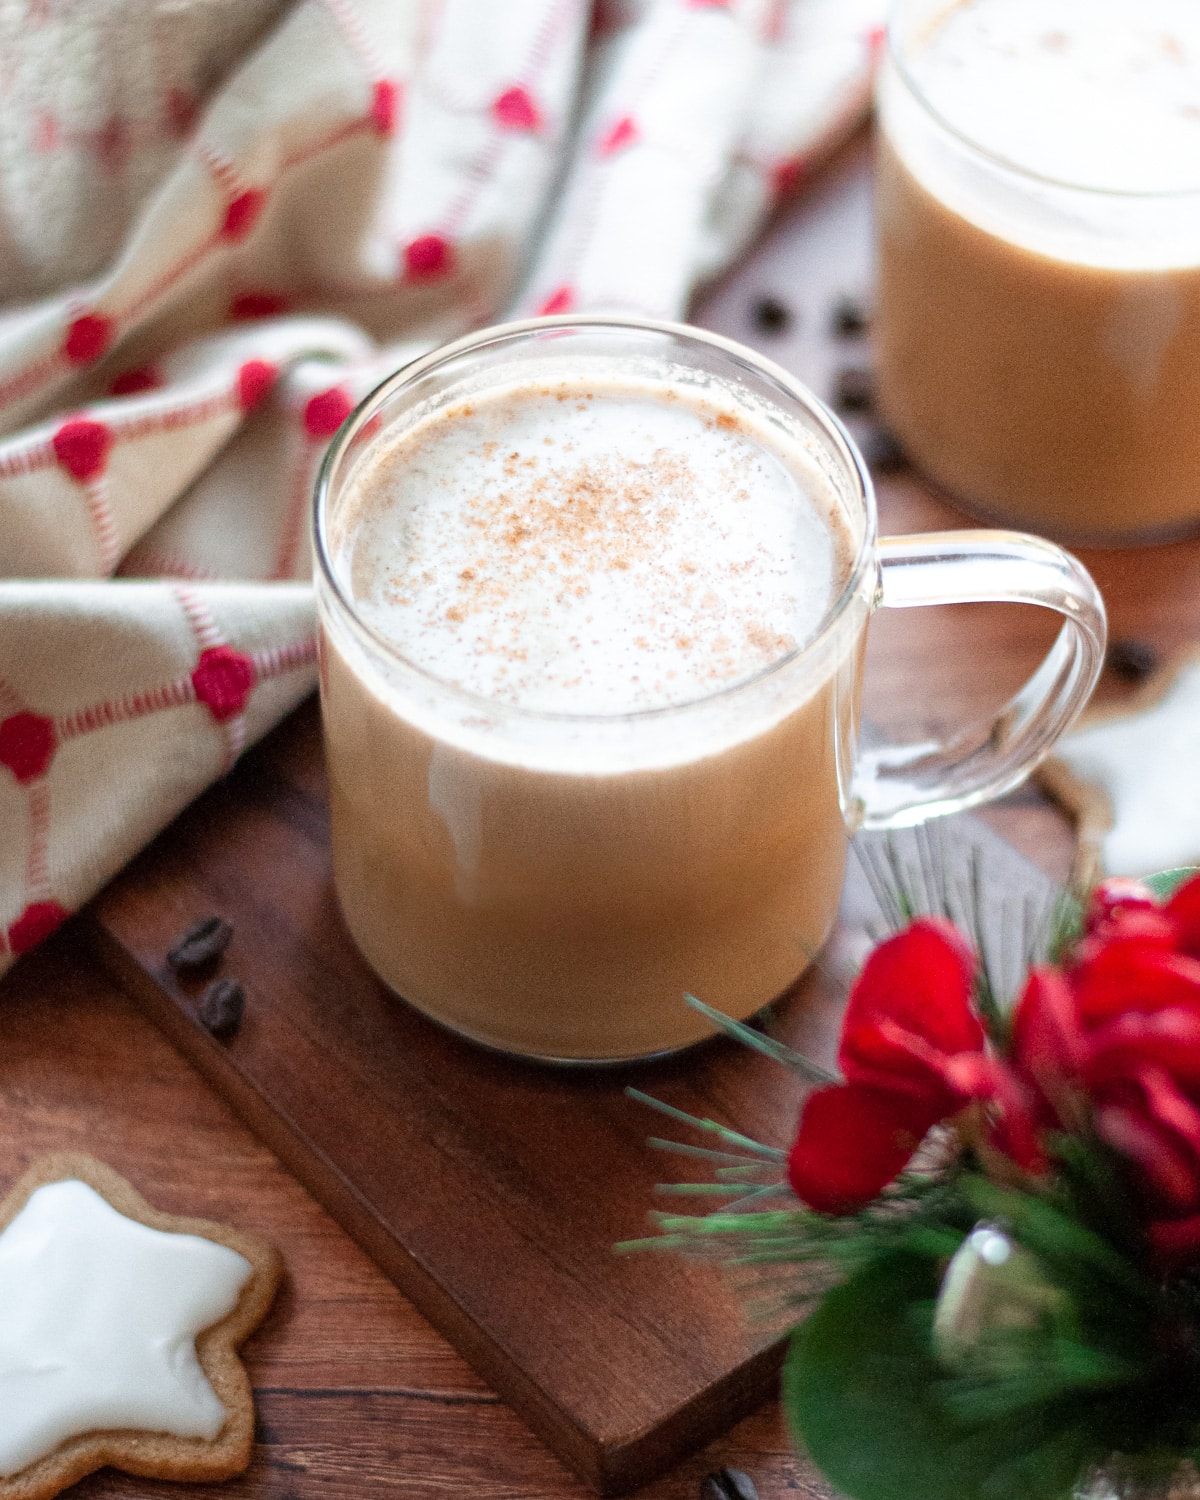 a glass mug with a homemade gingerbread latte sitting on a wooden board. Another mug sits in the background, along with a linen, coffee beans, an iced gingerbread cookie, and a holiday plant.